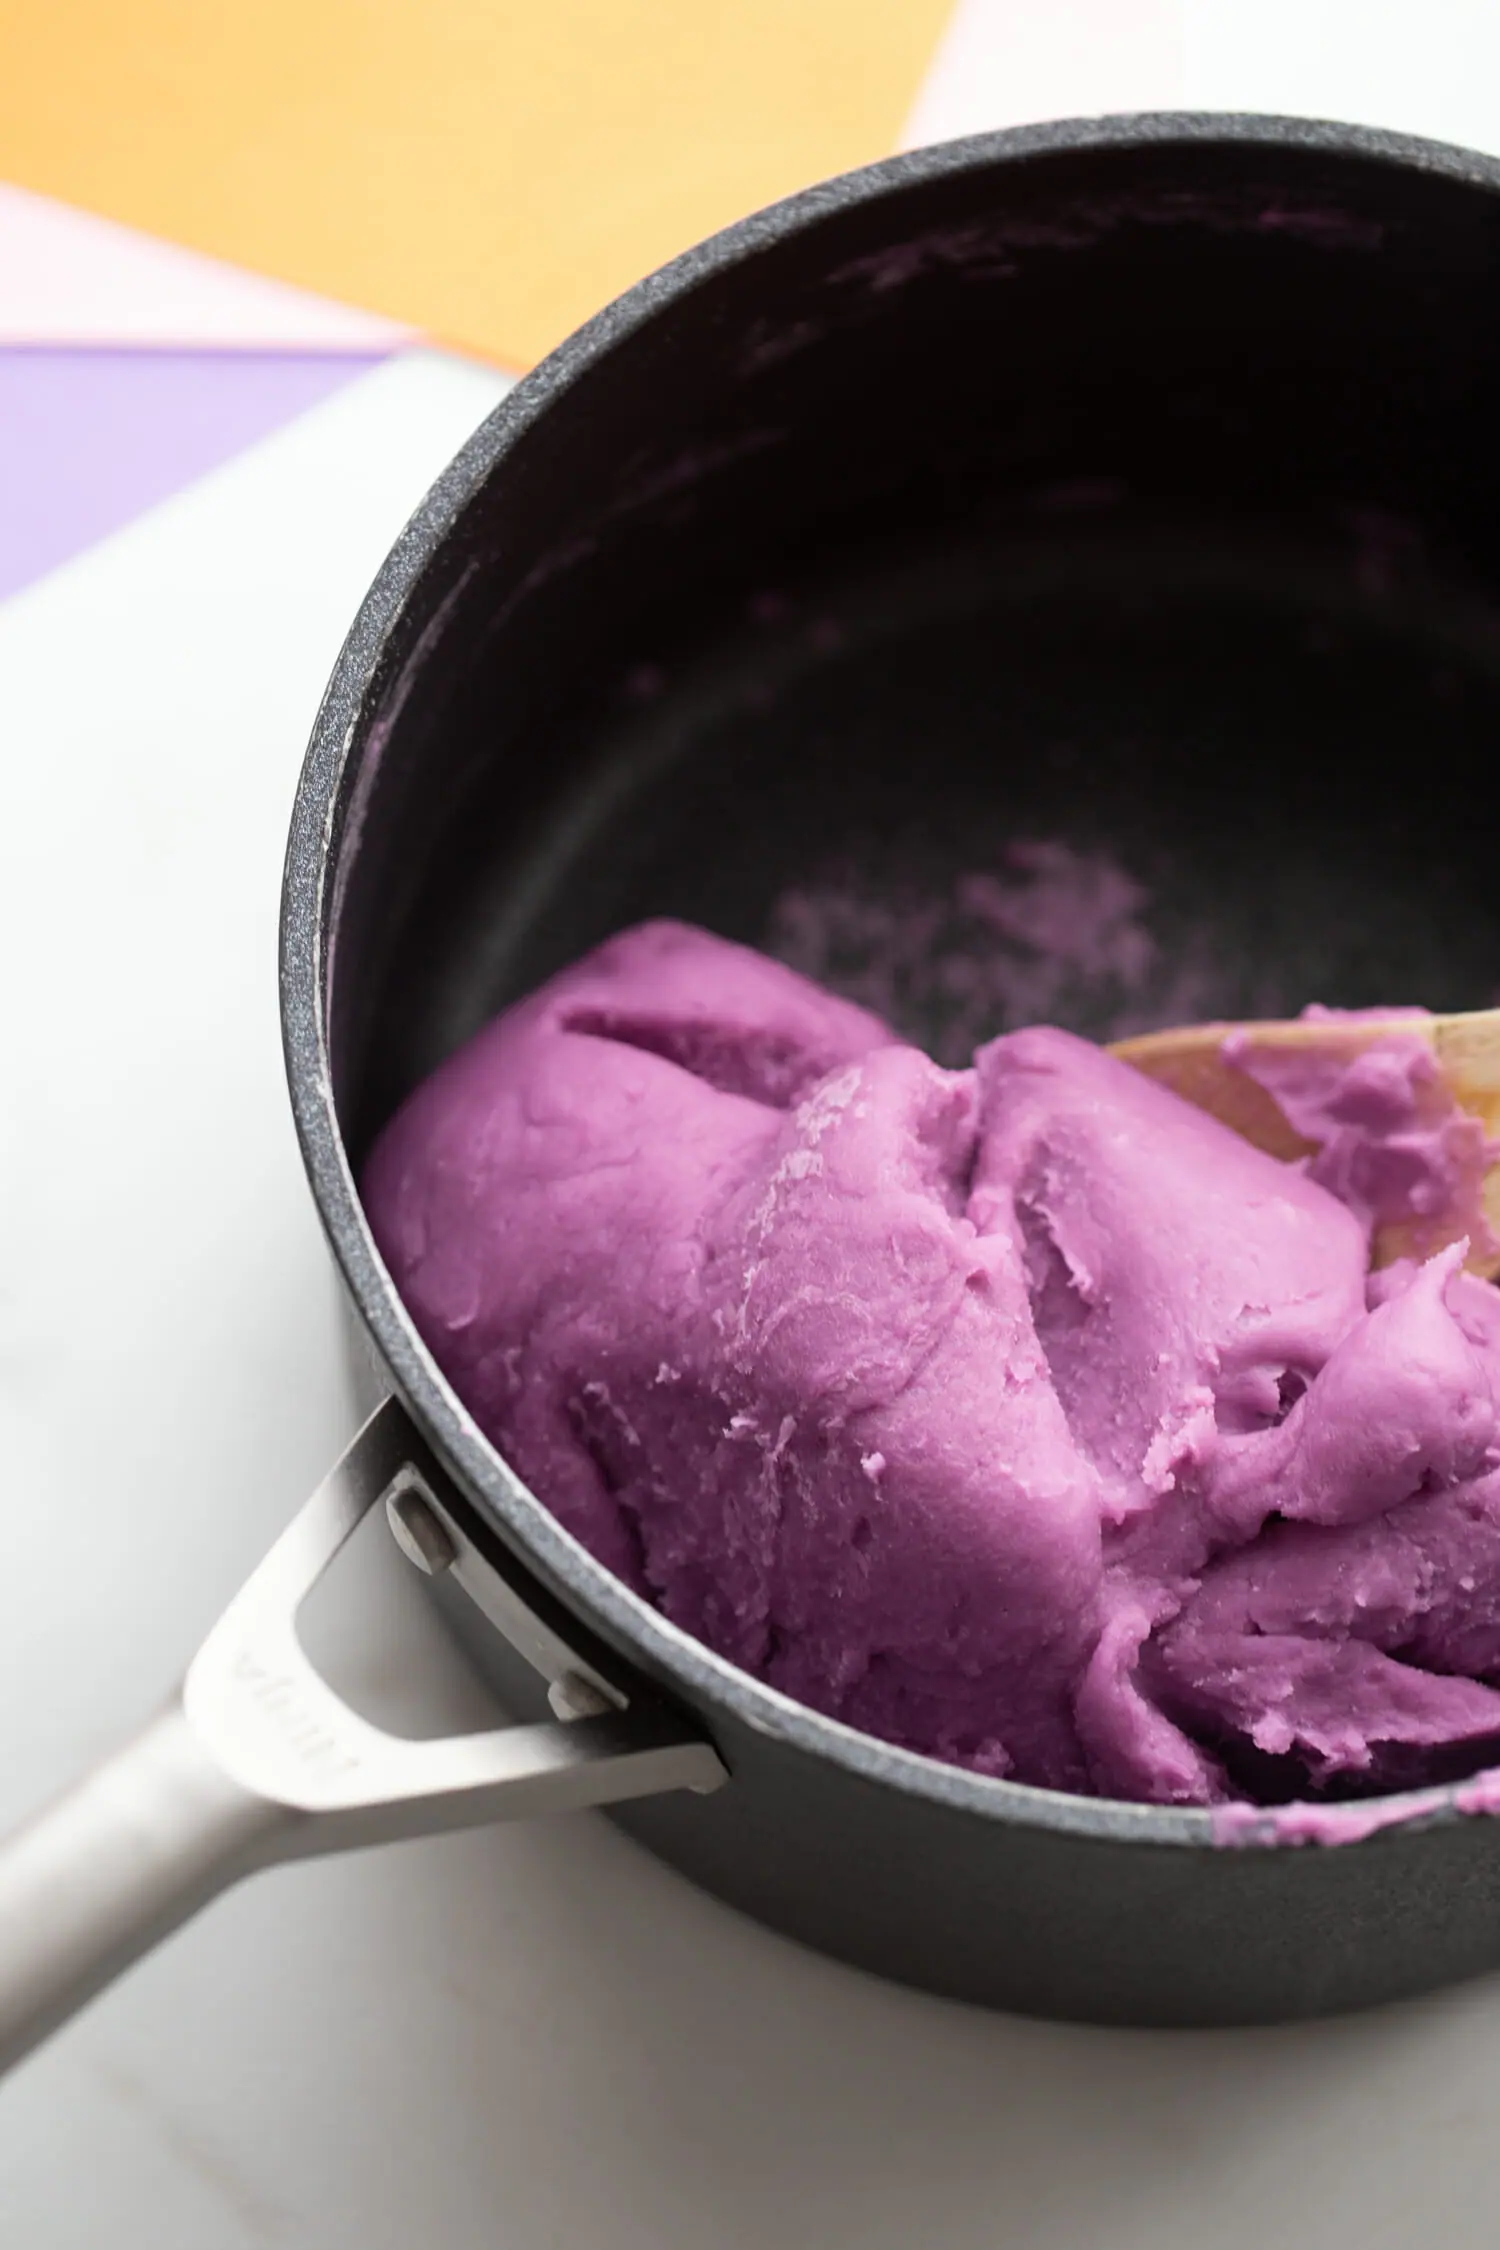 Wooden spoon mixing purple playdough together as playdough is almost fully formed.